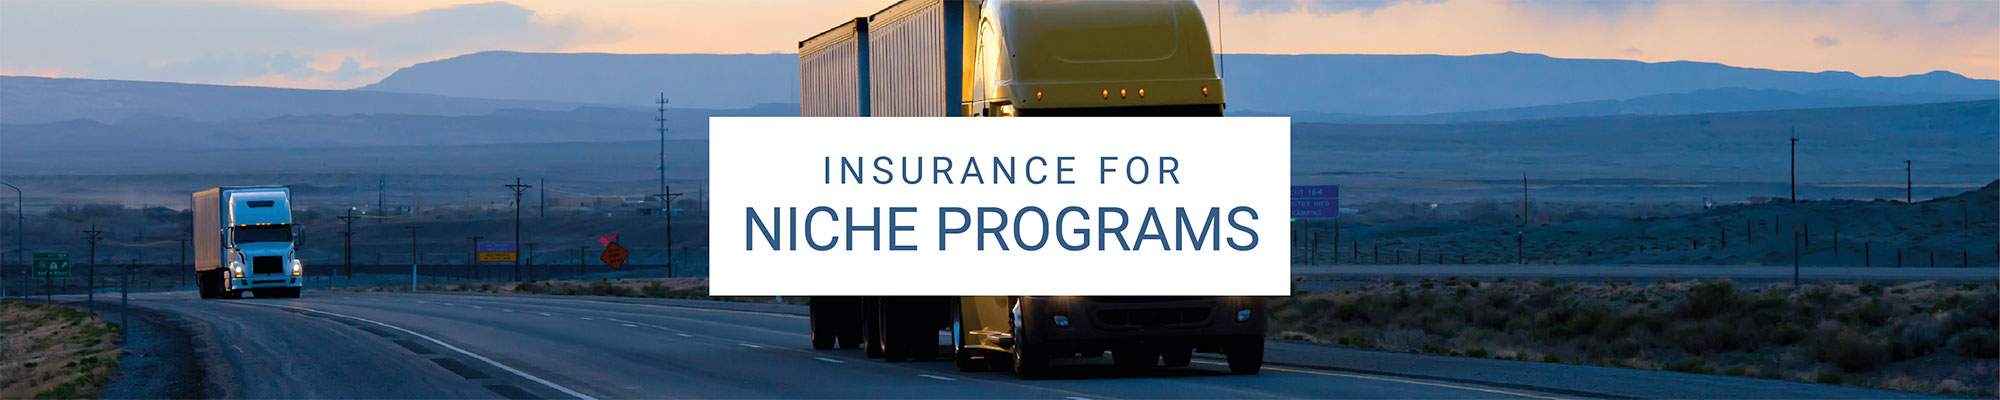 photo of trucks on highway with text 'Insurance for Niche Programs'